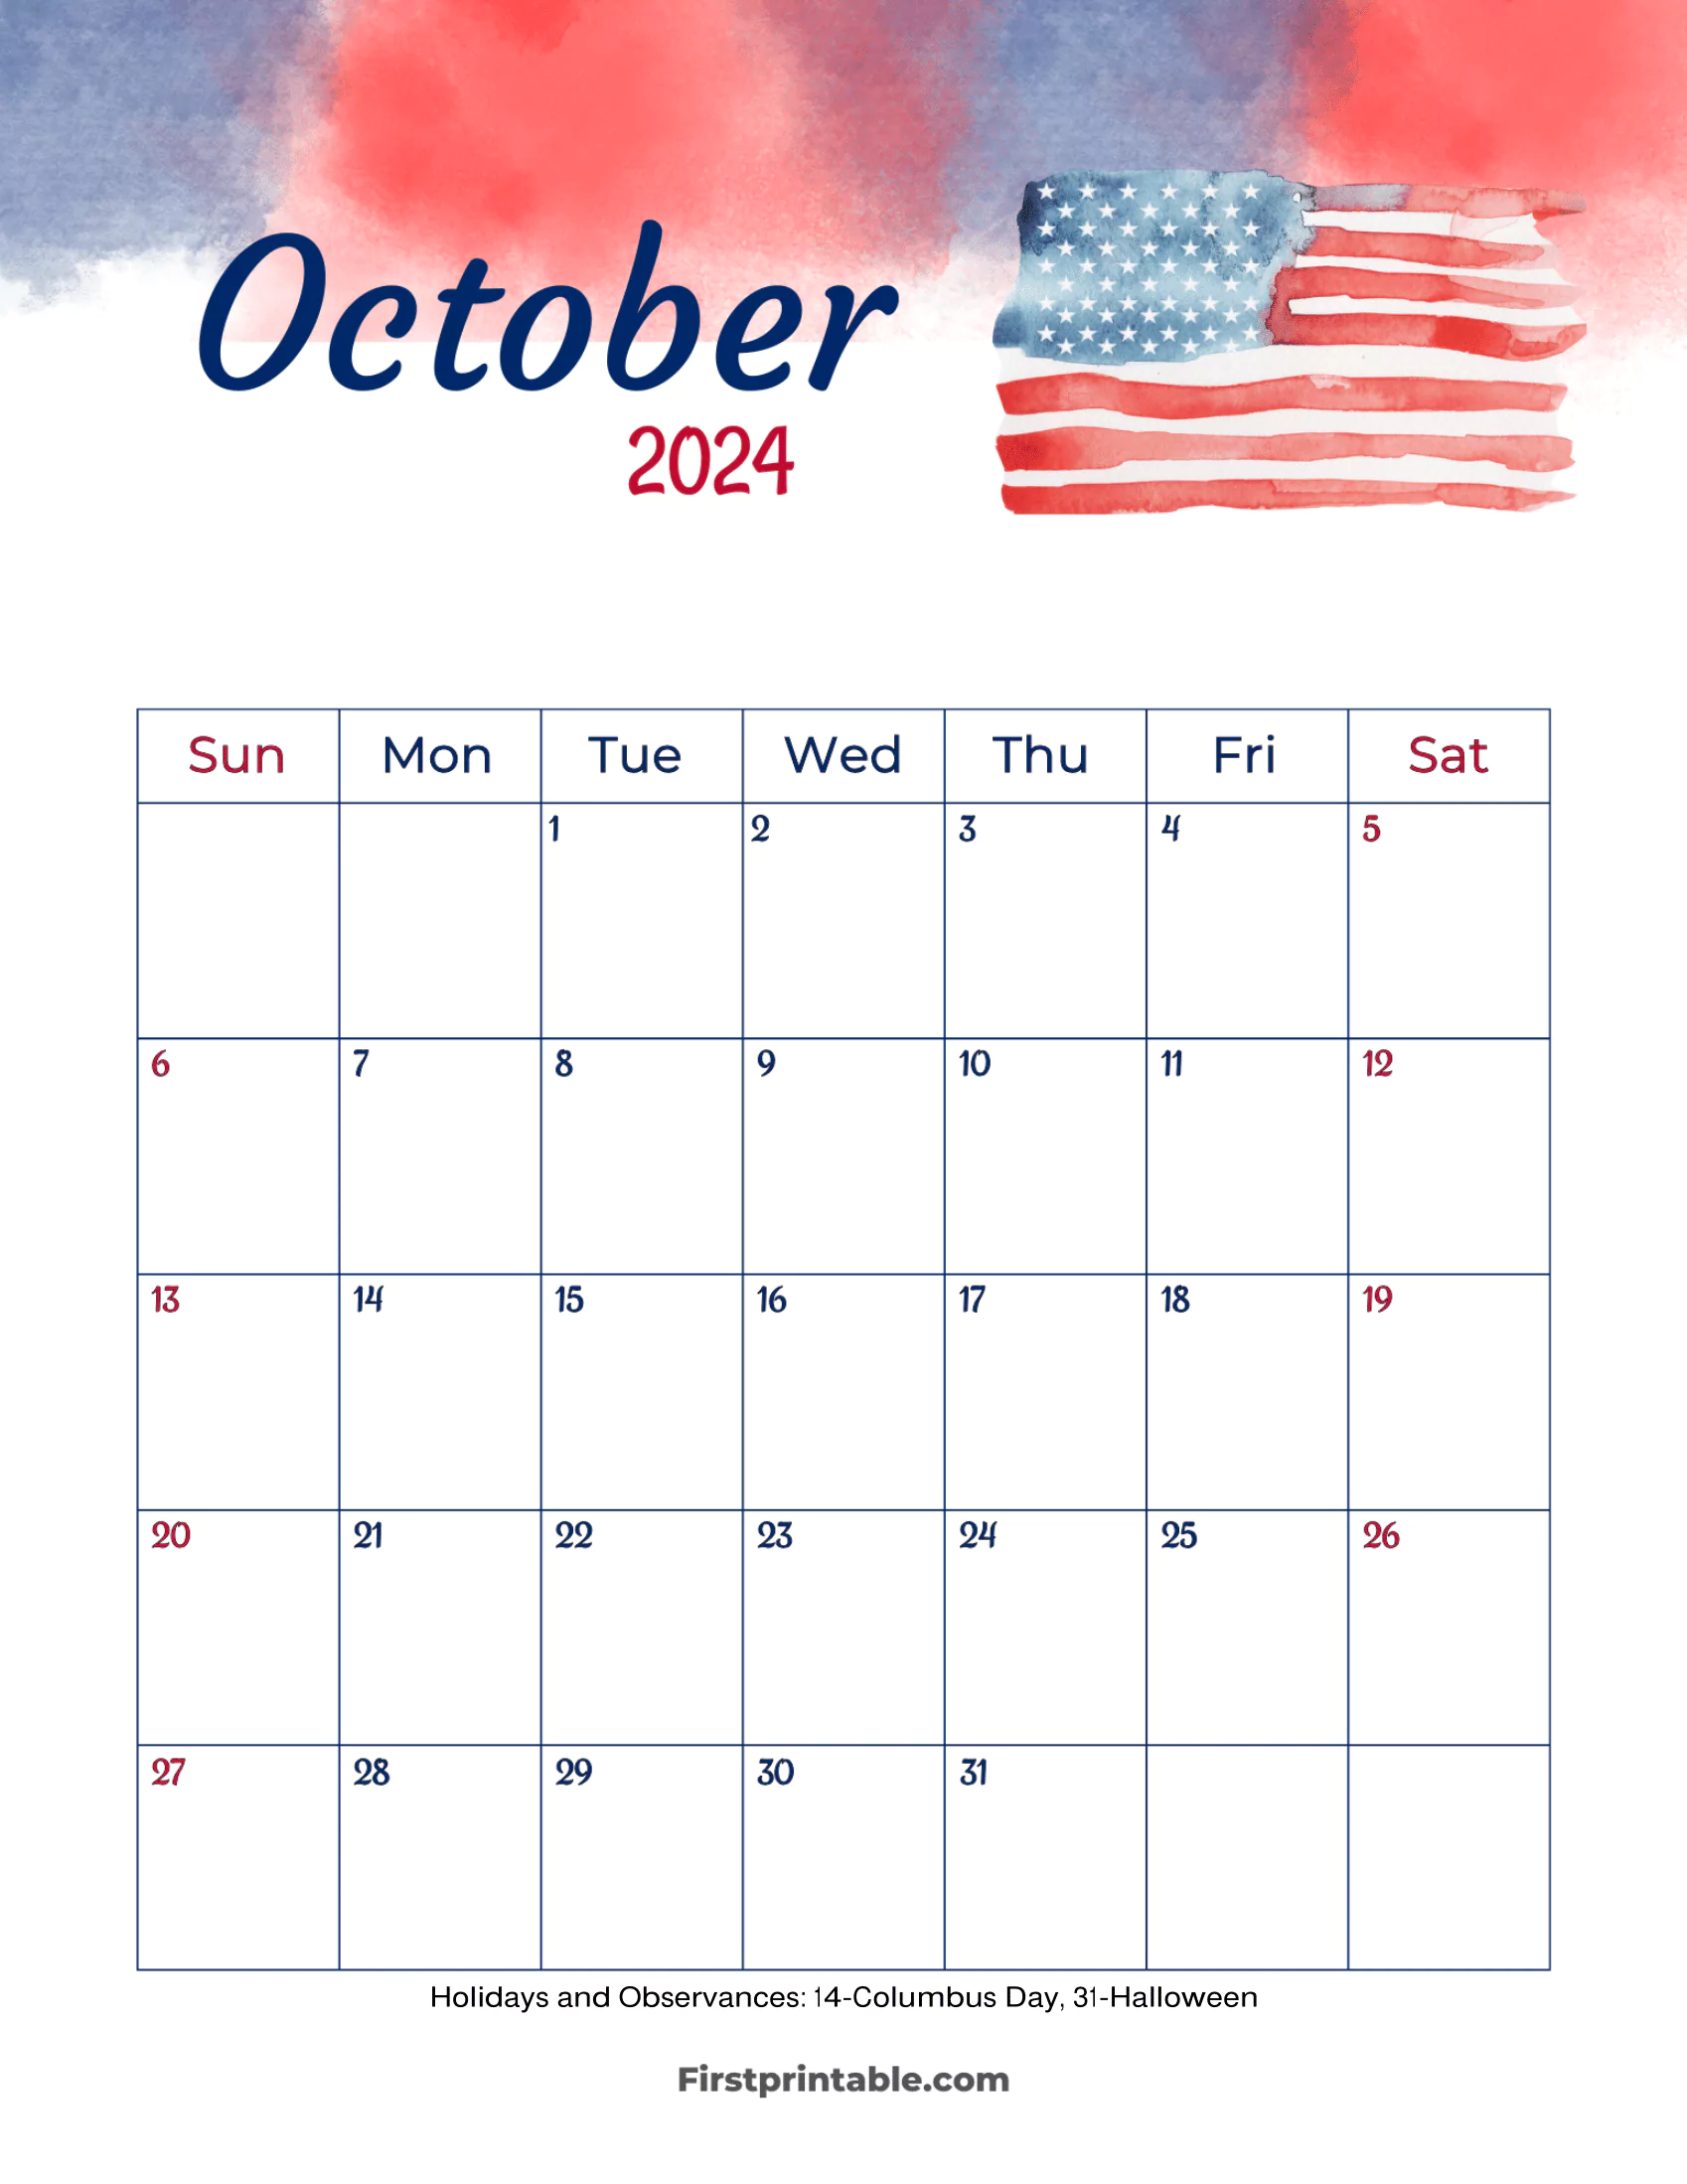 October Calendar 2024 Printable & Fillable with US Holidays